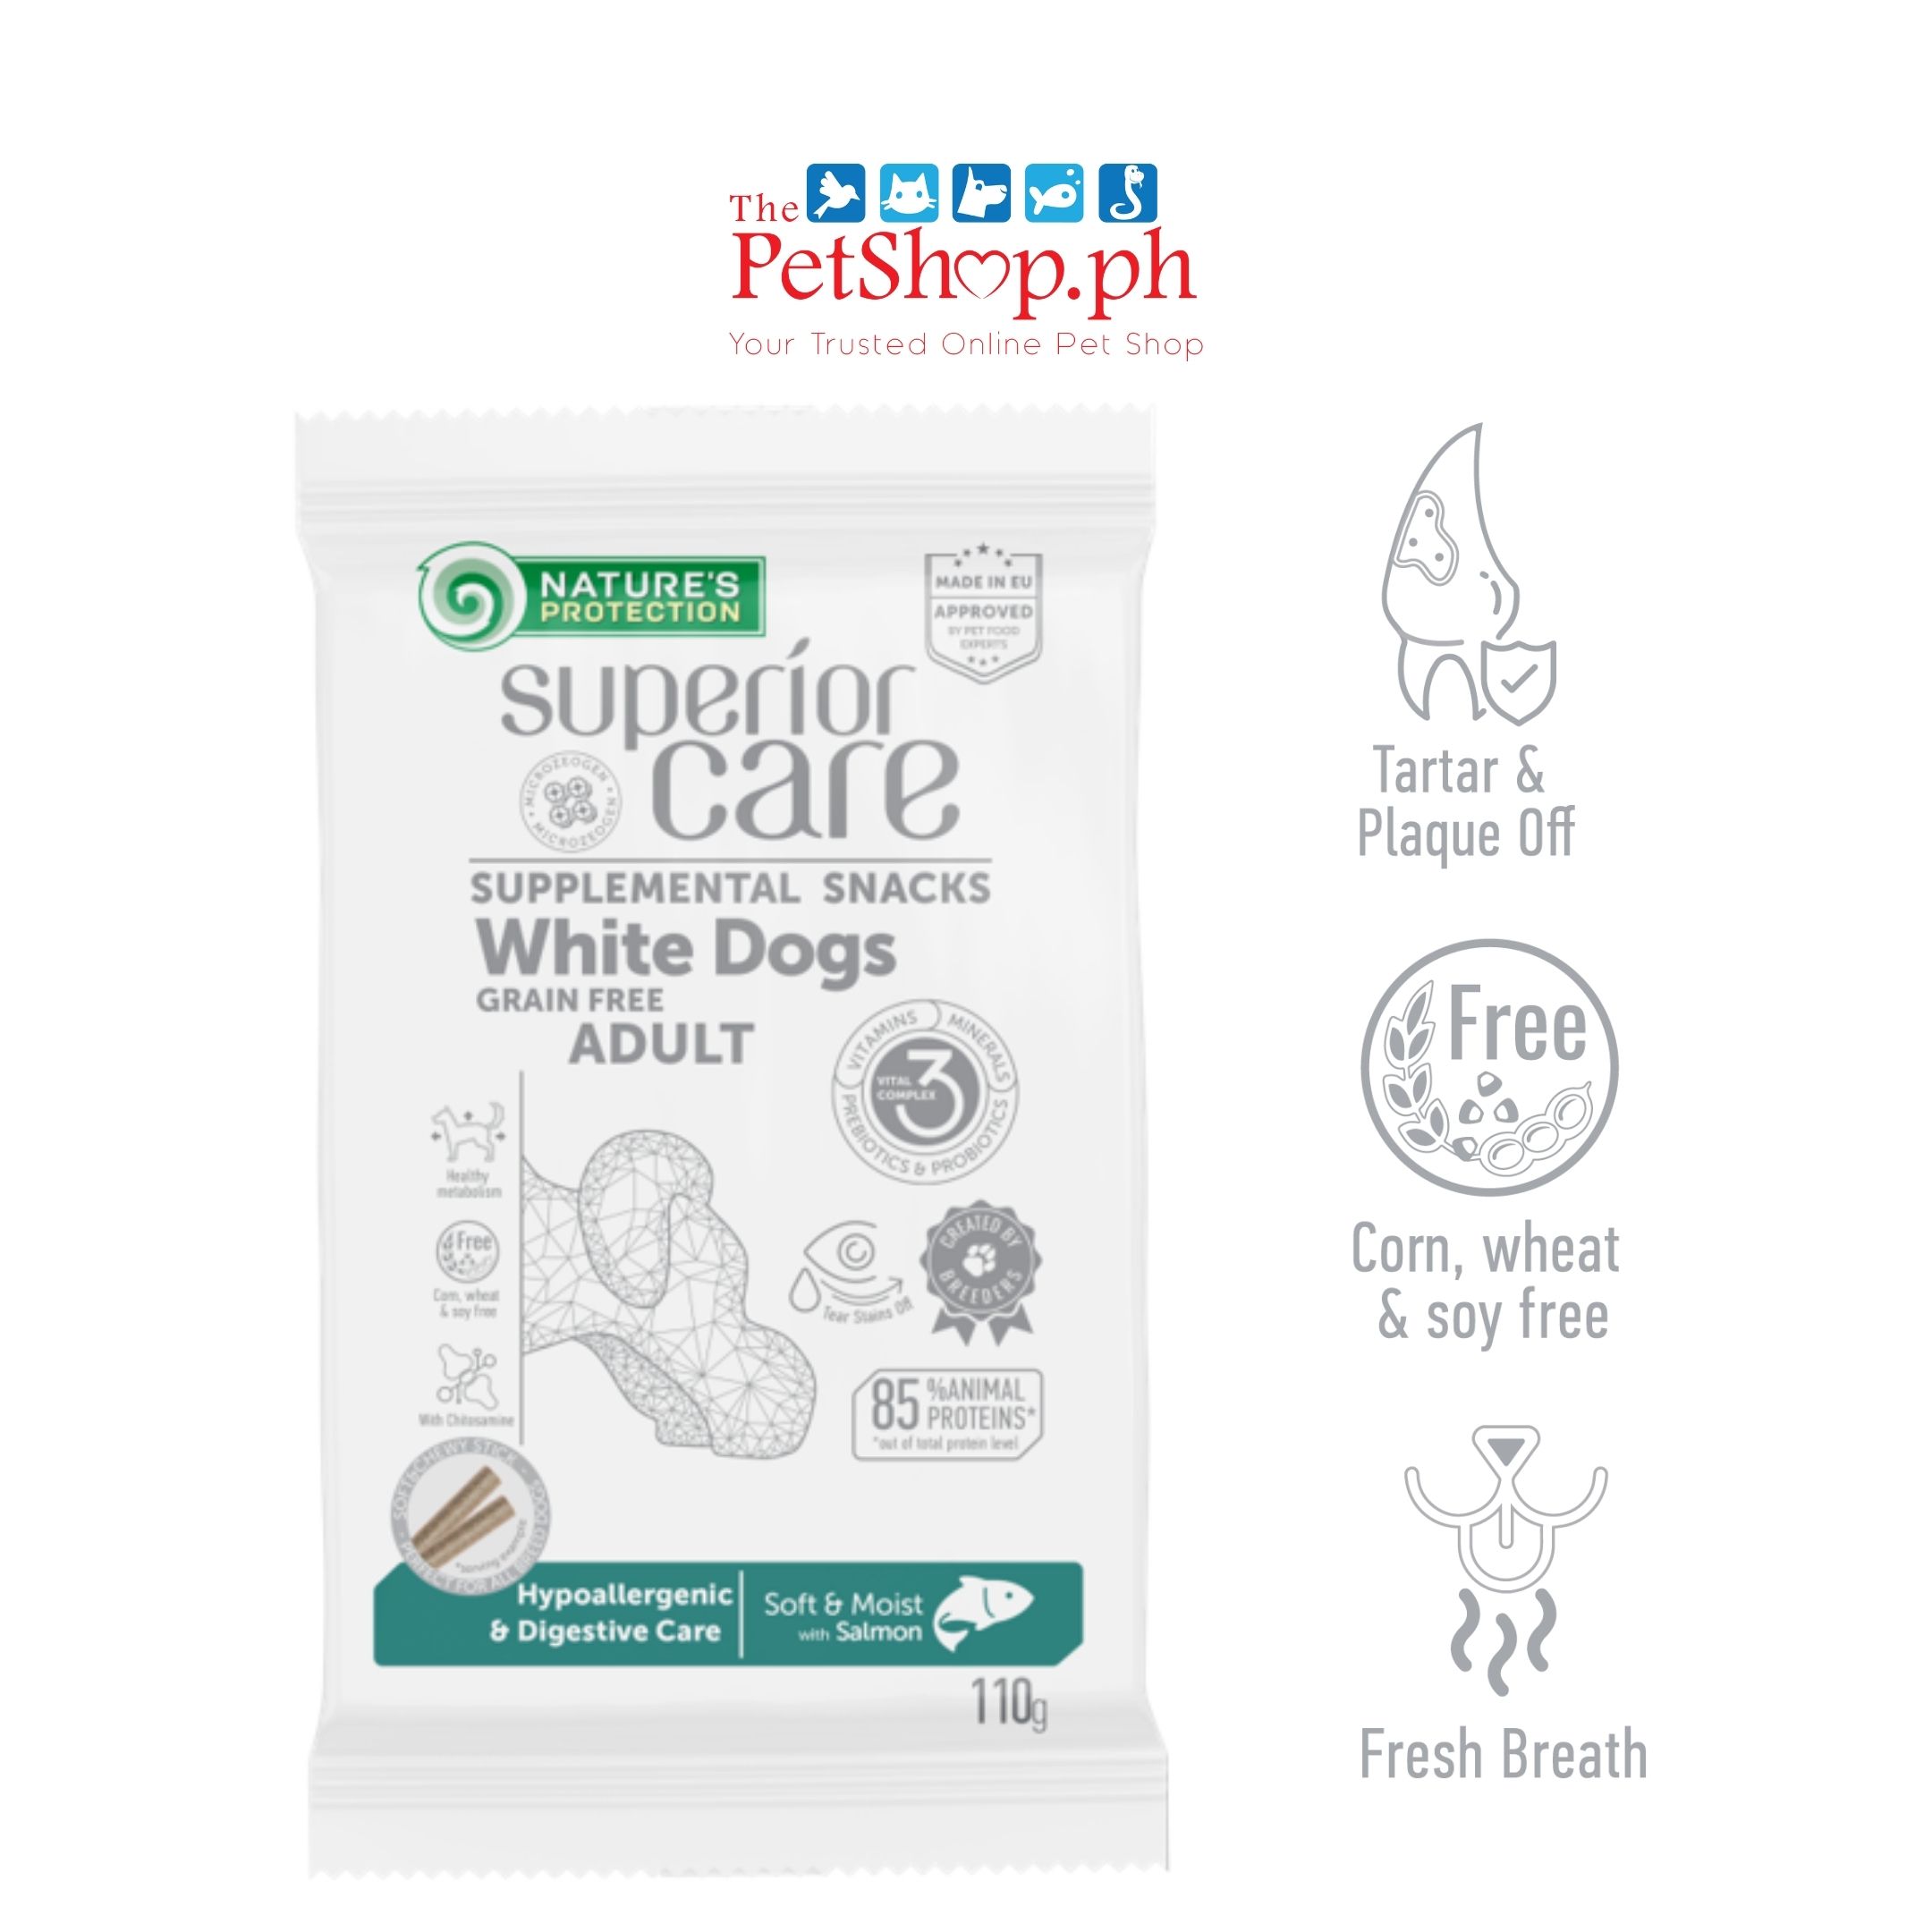 Nature's Protection Superior Care Supplemental Snacks for White Dogs - Hypoallergenic & digestive care with salmon